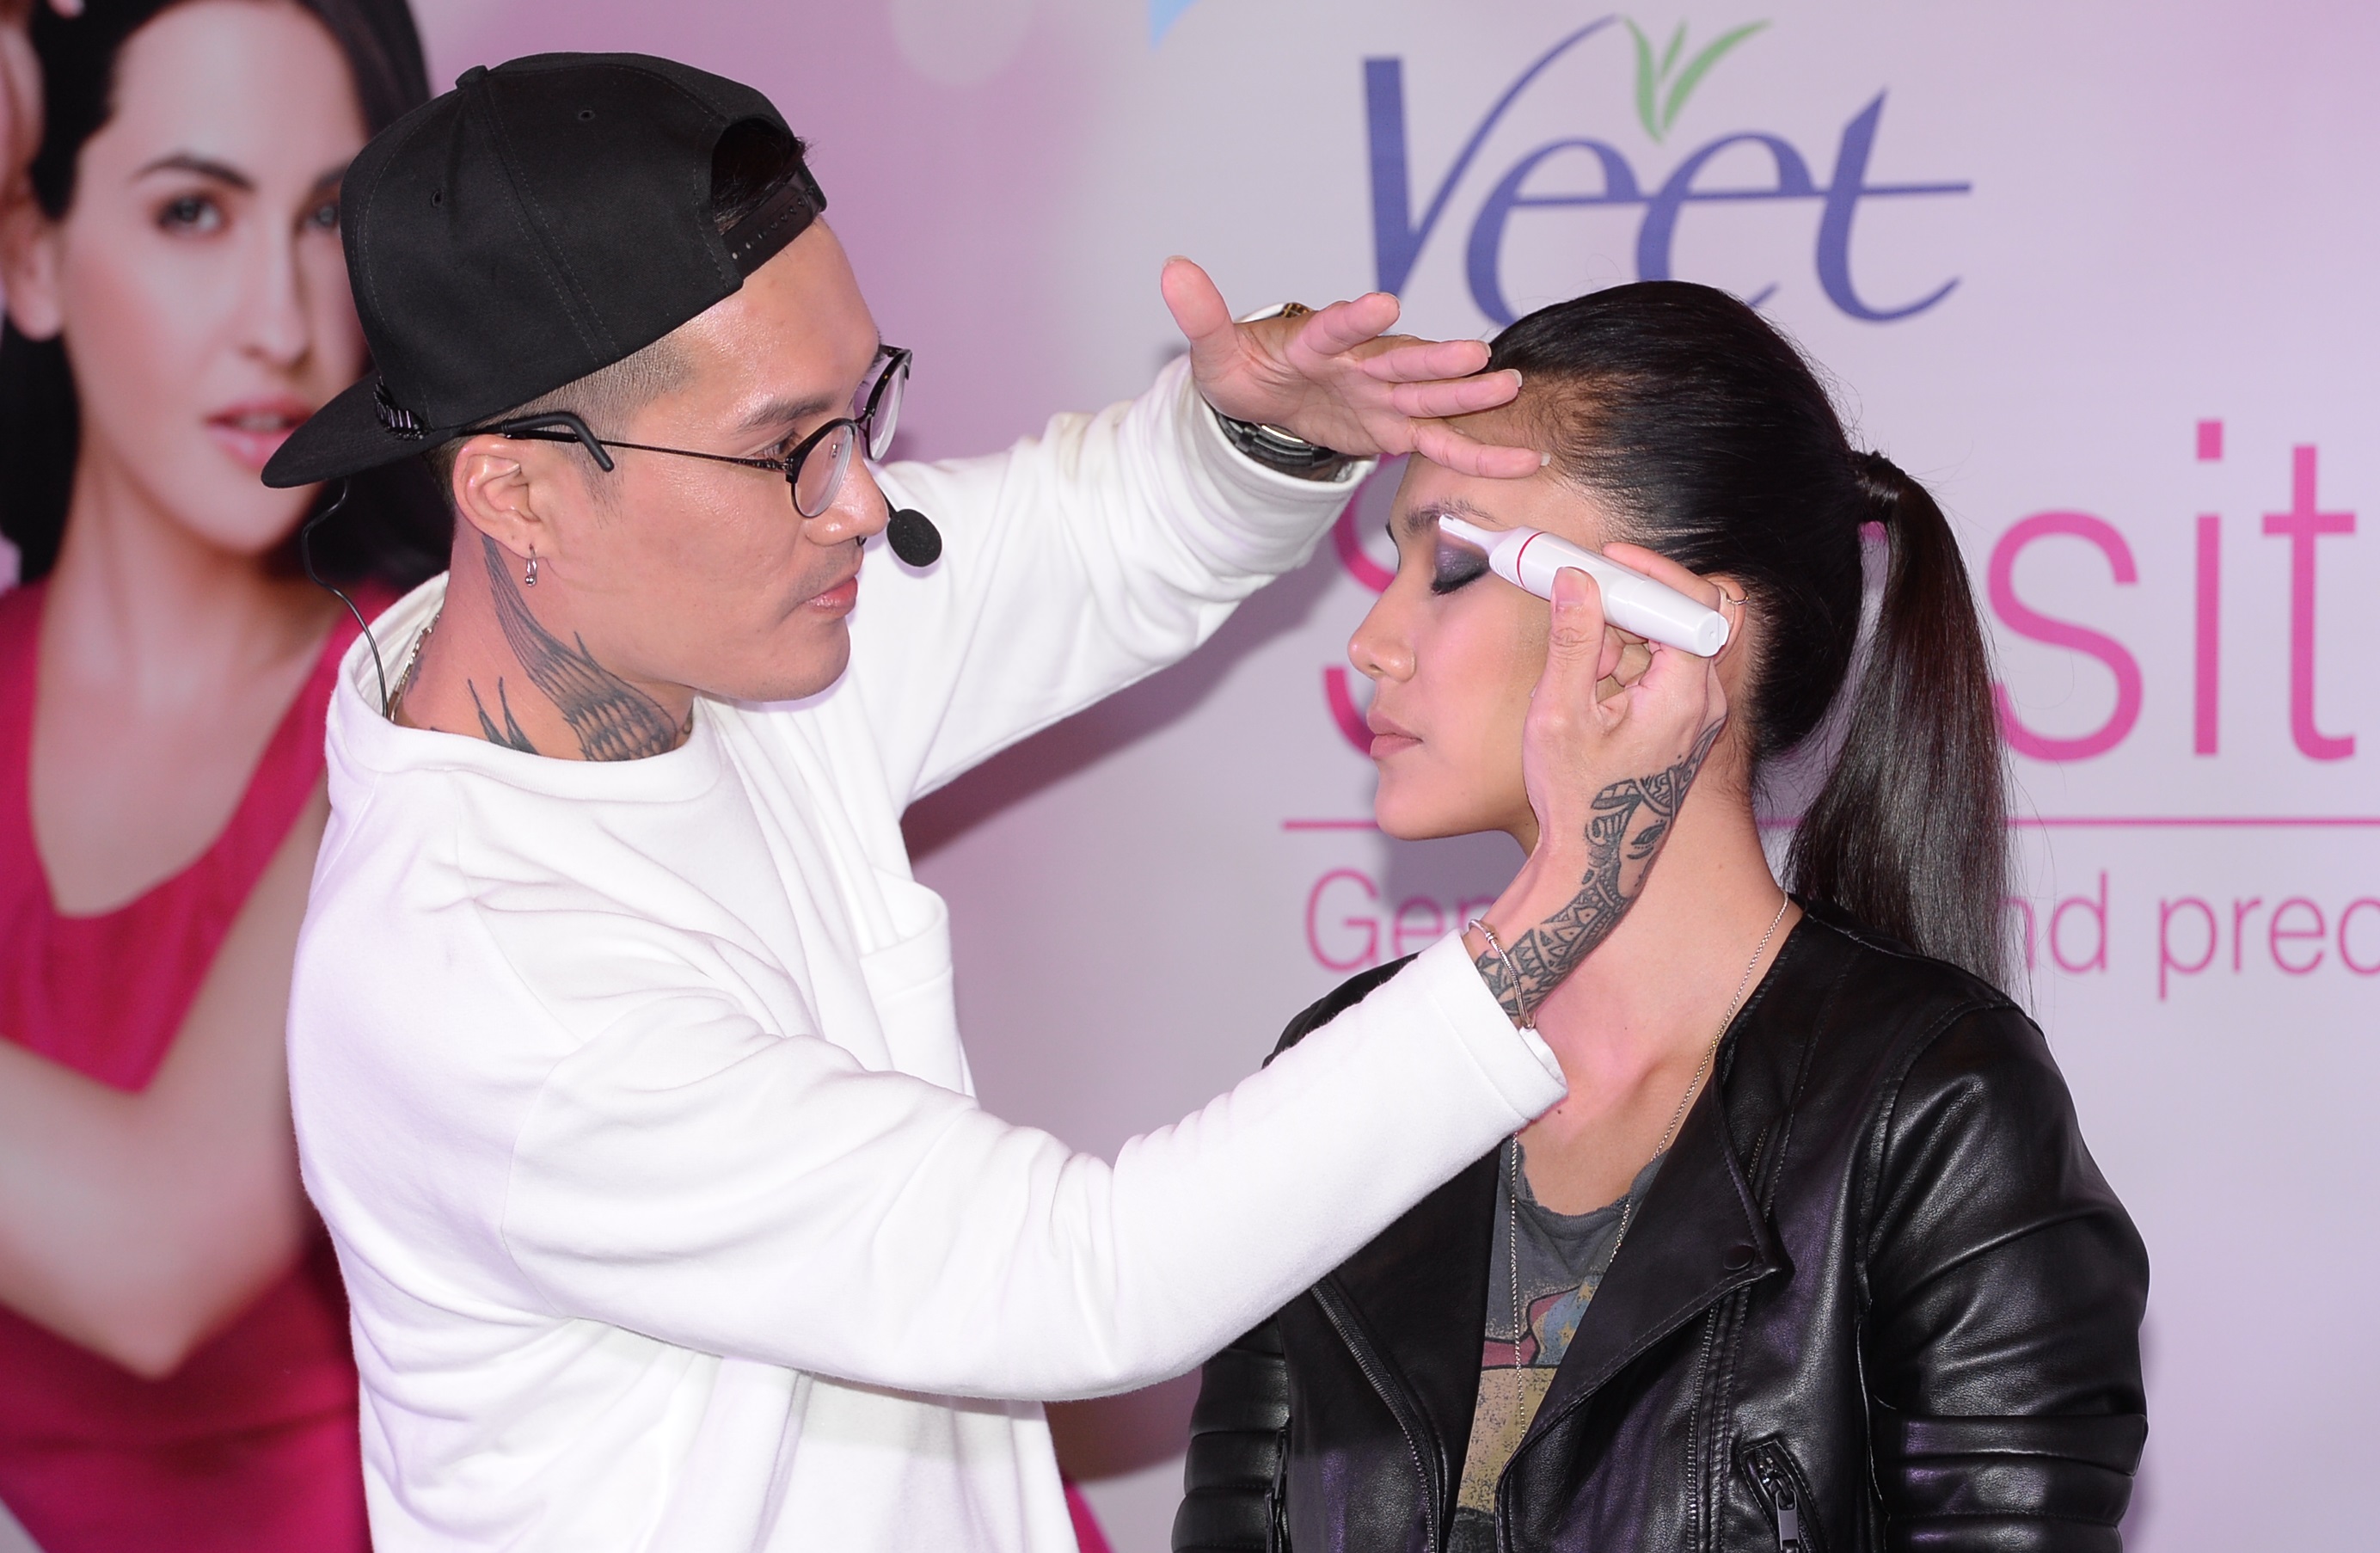 Stevensunny during the Veet Sensitive Touch launch-Pamper.my